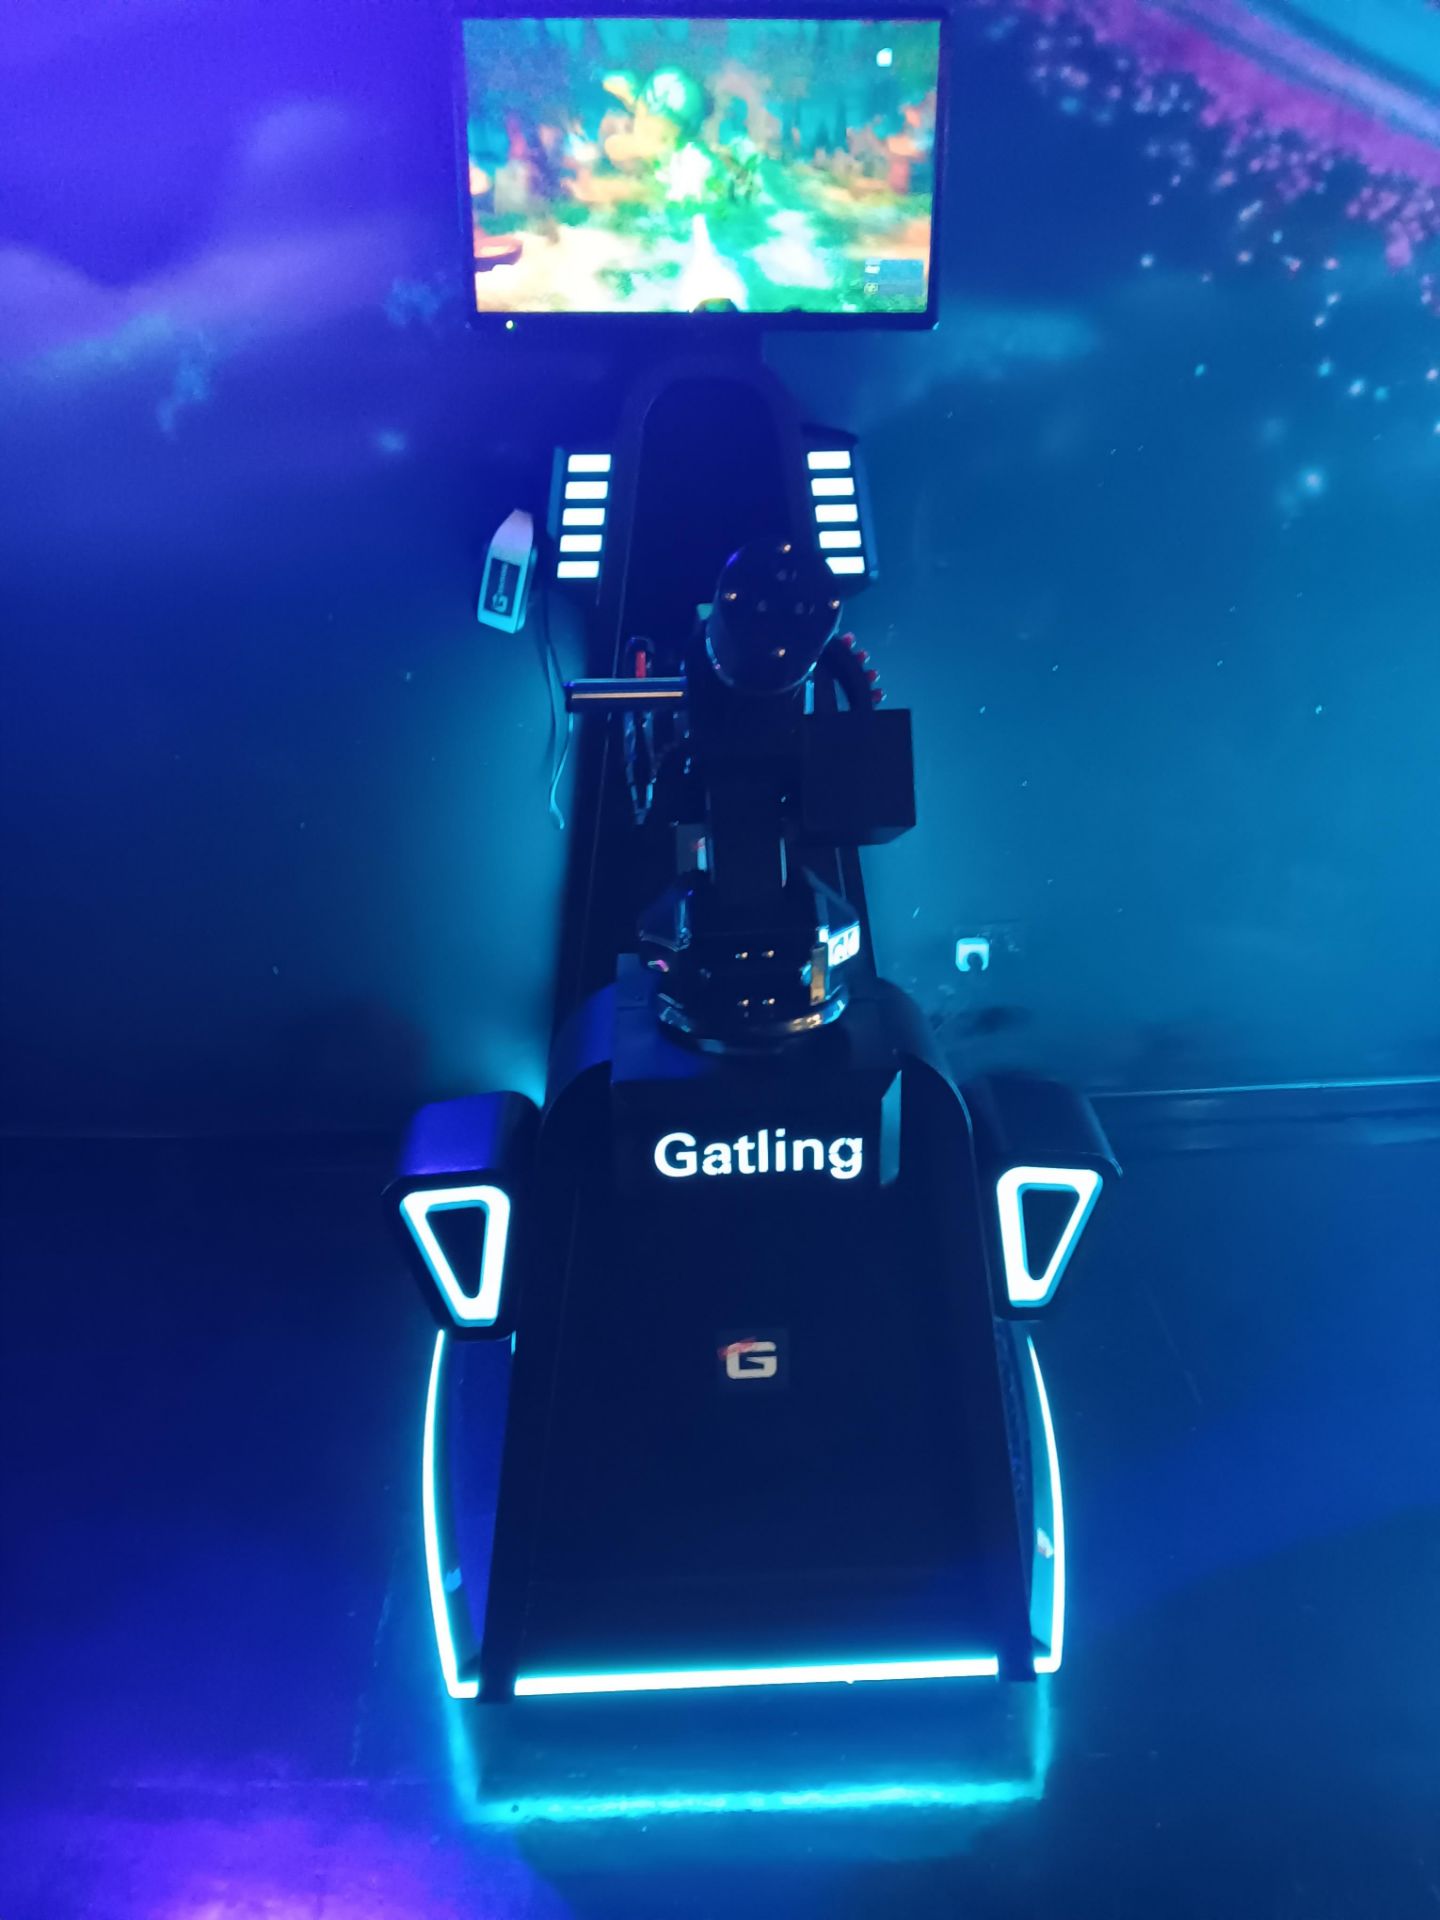 Movie Power VR Gatling Gun Shooting Simulator – Cost New £9,000 – Buyer to Disconnect & remove - Image 3 of 5